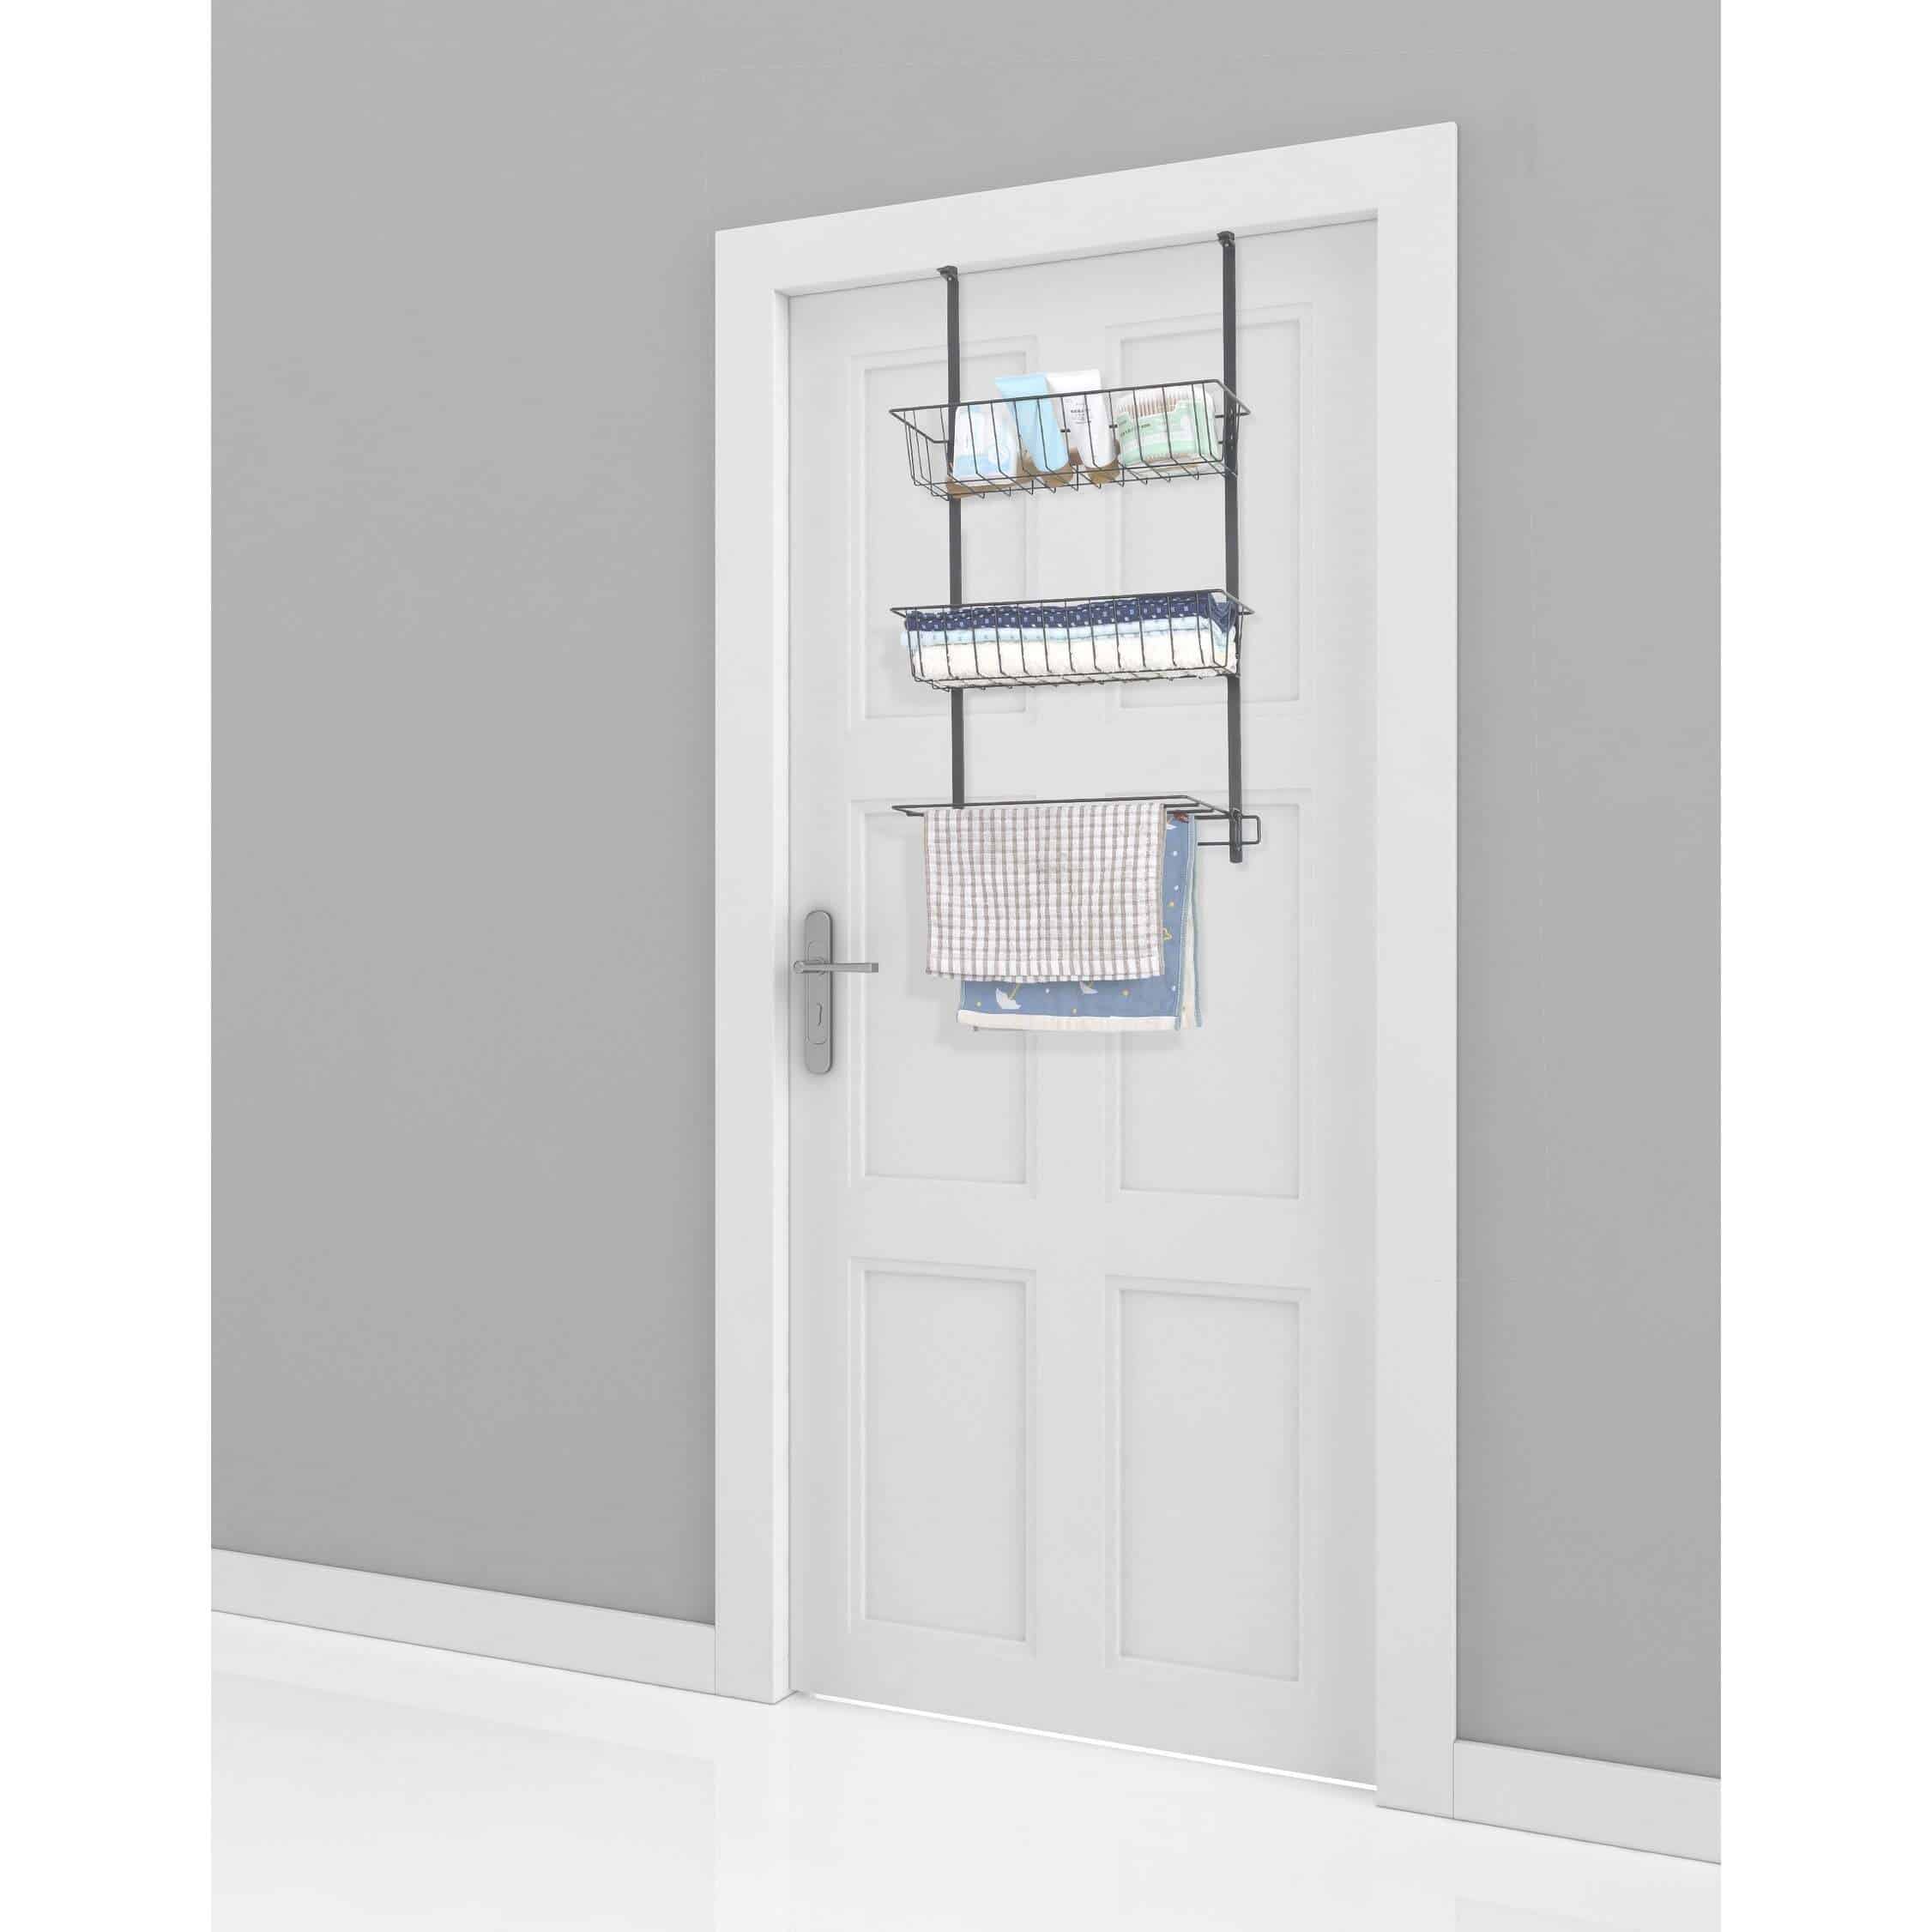 Reduce Clutter With An Over The Door Rack